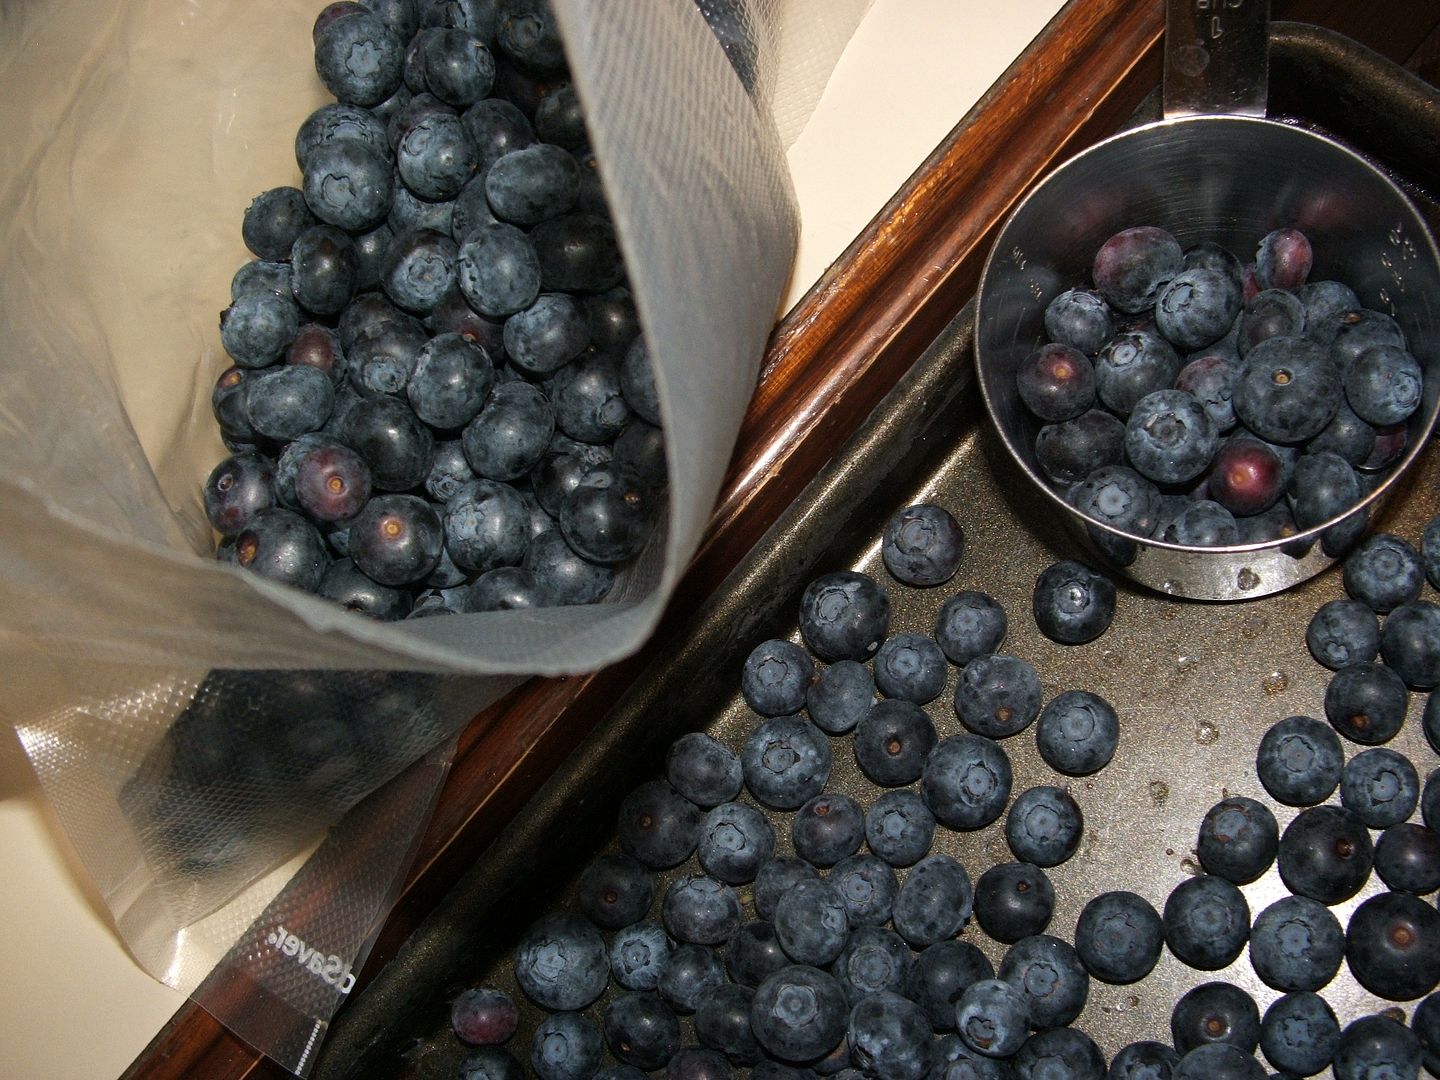 Freezing Blueberries, by Angie Ouellette-Tower for godsgrowinggarden.com